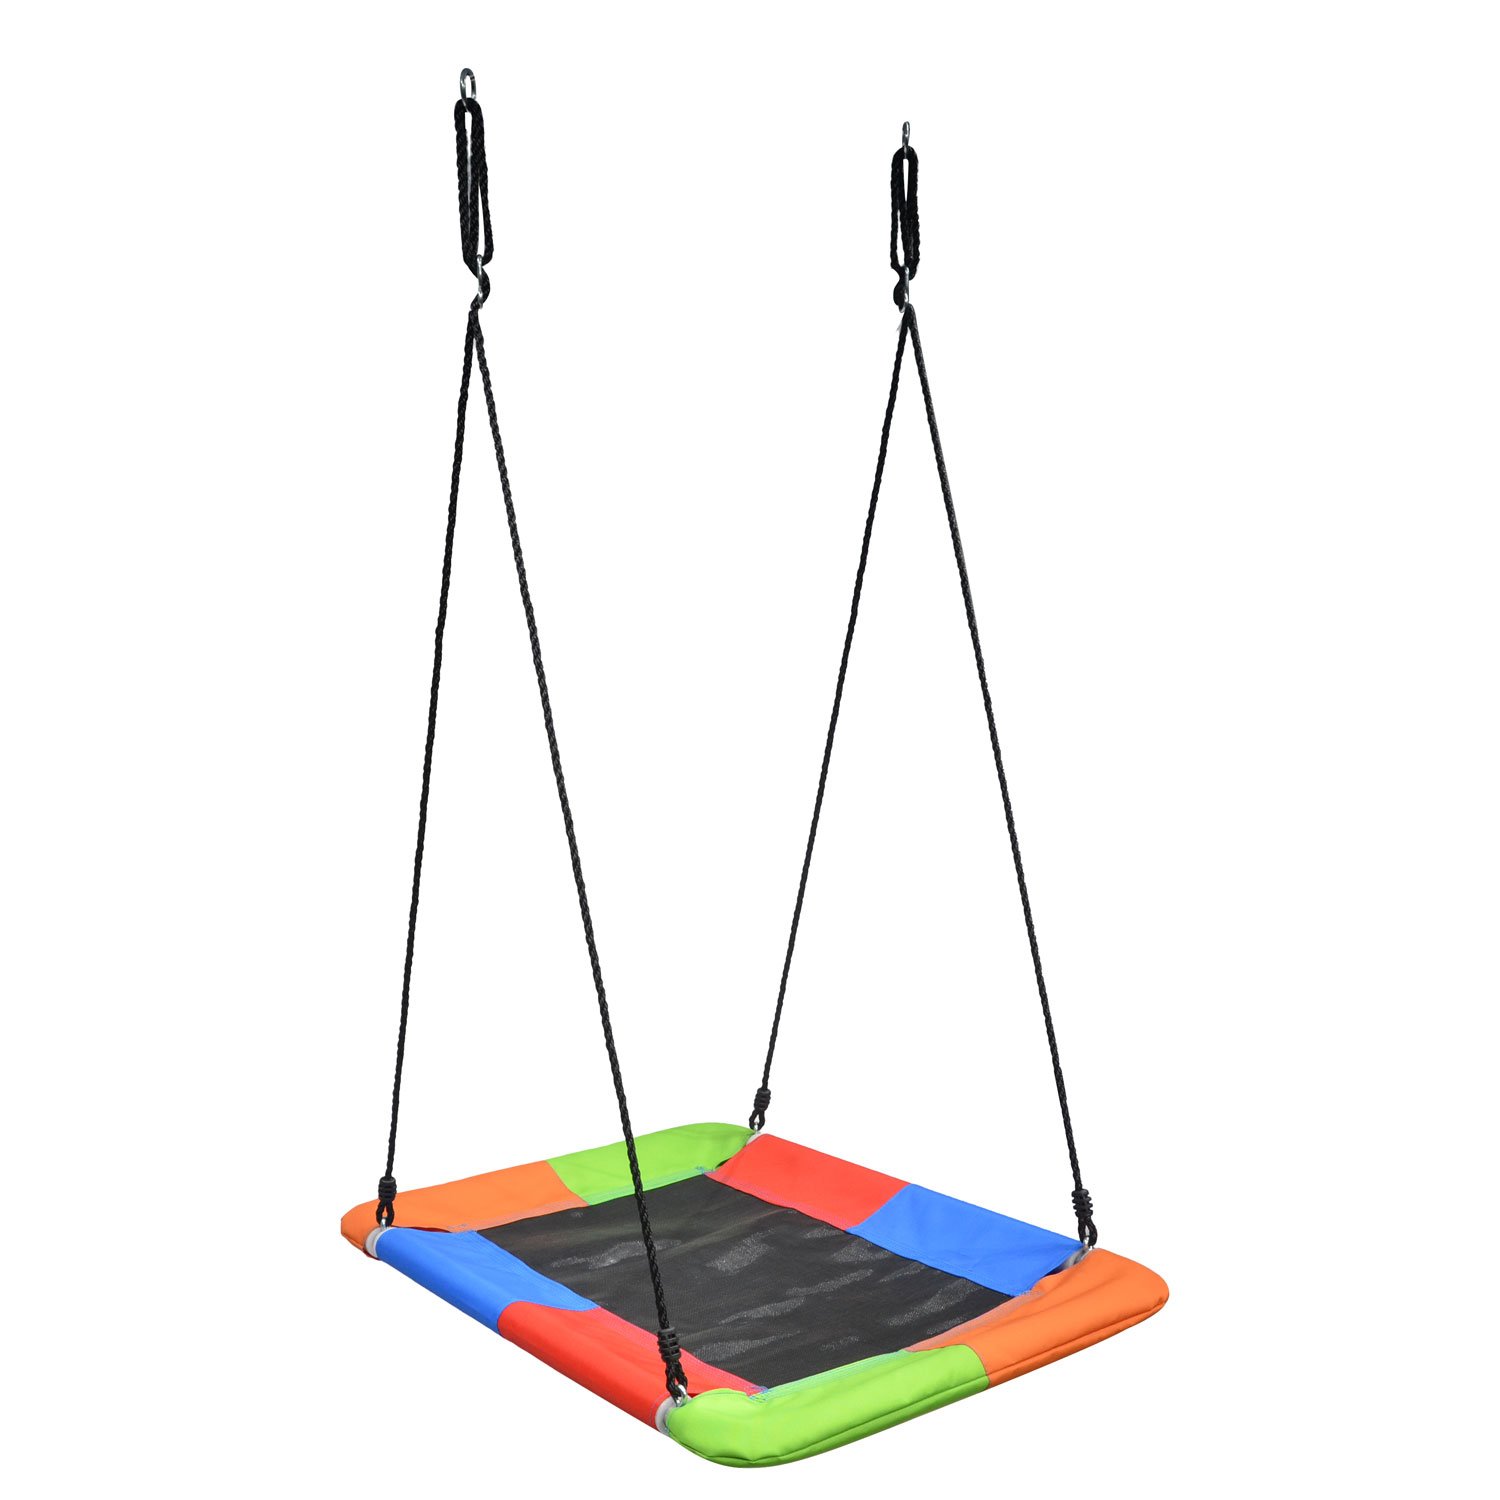 ADHD ZCXBHD Indoor Sensory Swing for Adults Indoor Swing for Adults with Autism Durable Indoor Fabric Swing Kids Sensory Swing Helps with Disorder Autism